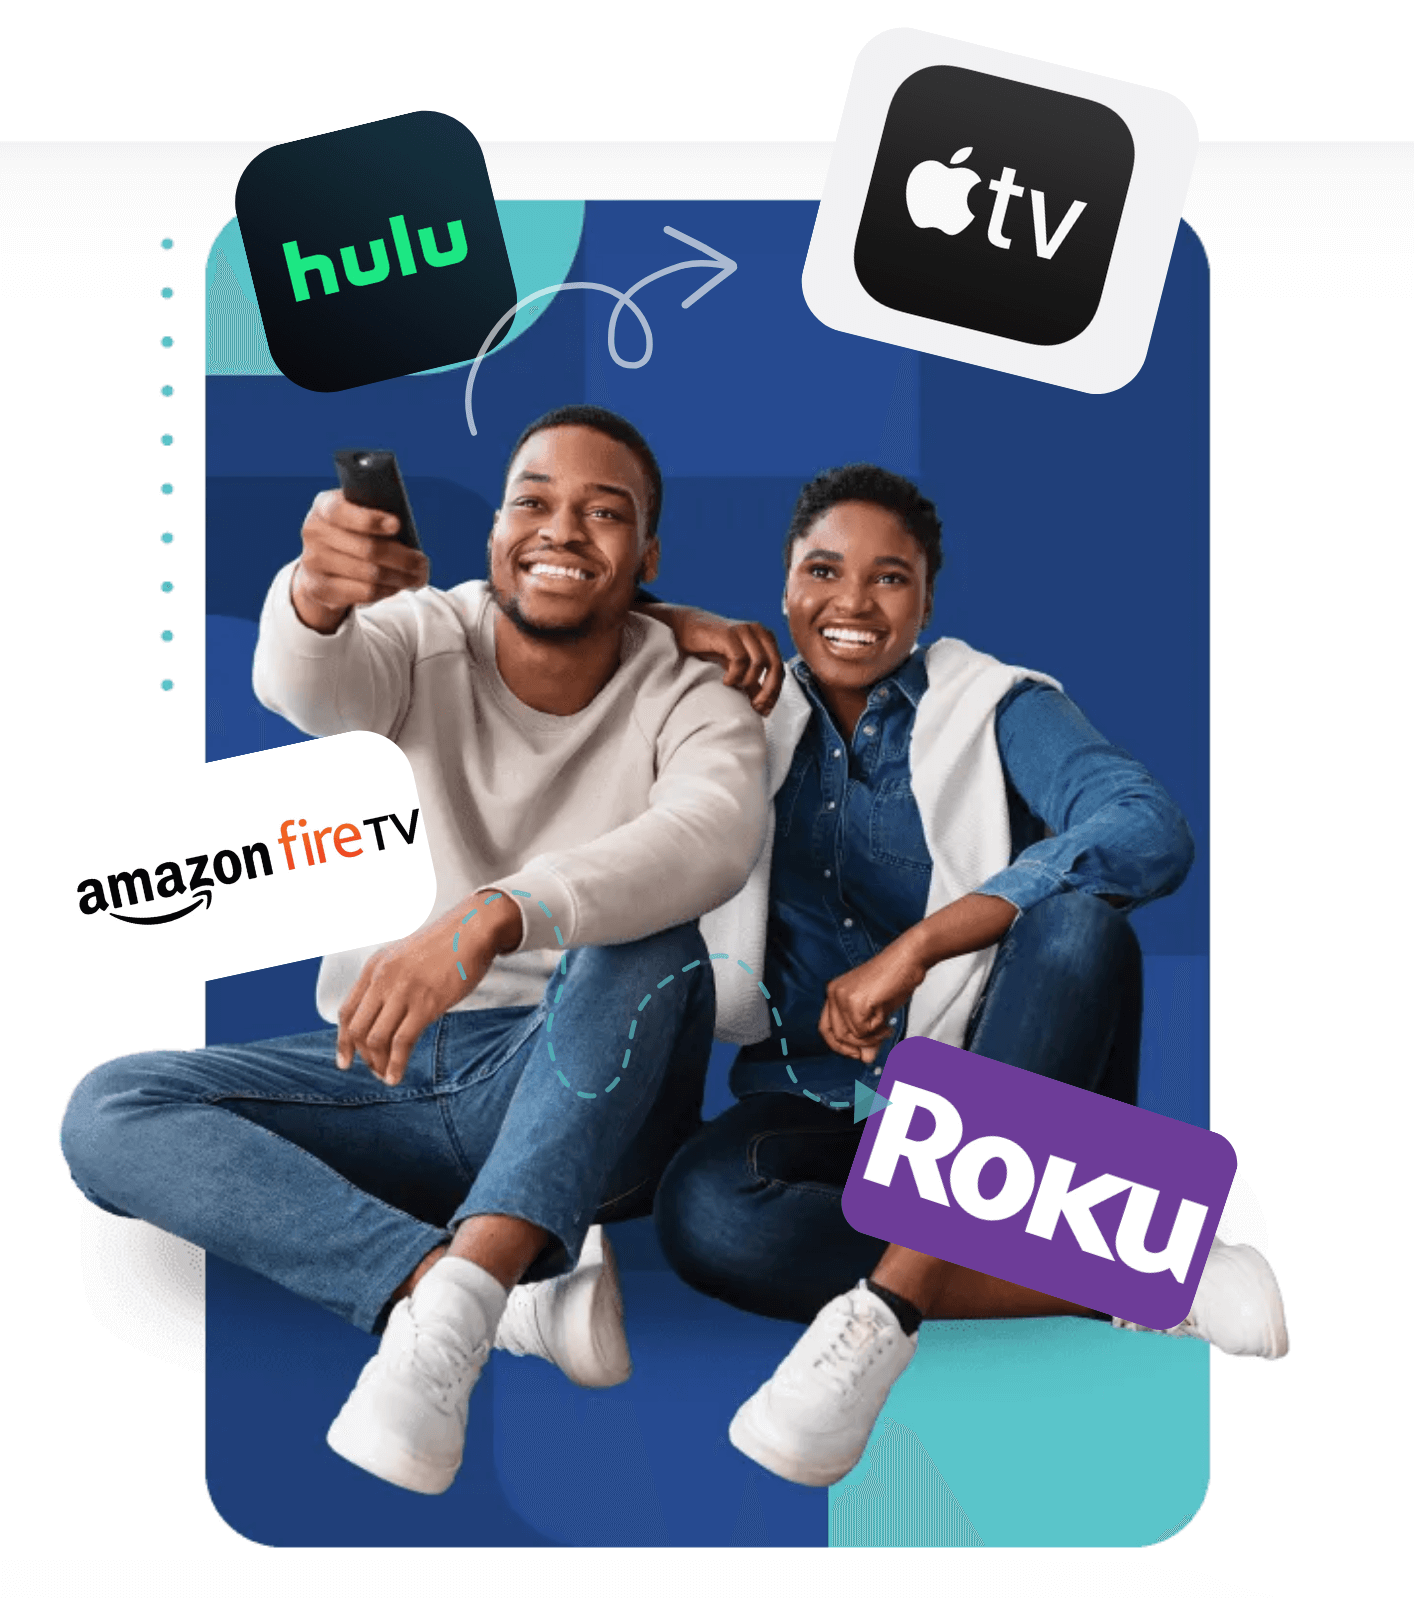 Two friends relax with remote, surrounded by streaming service icons like Hulu and Roku.